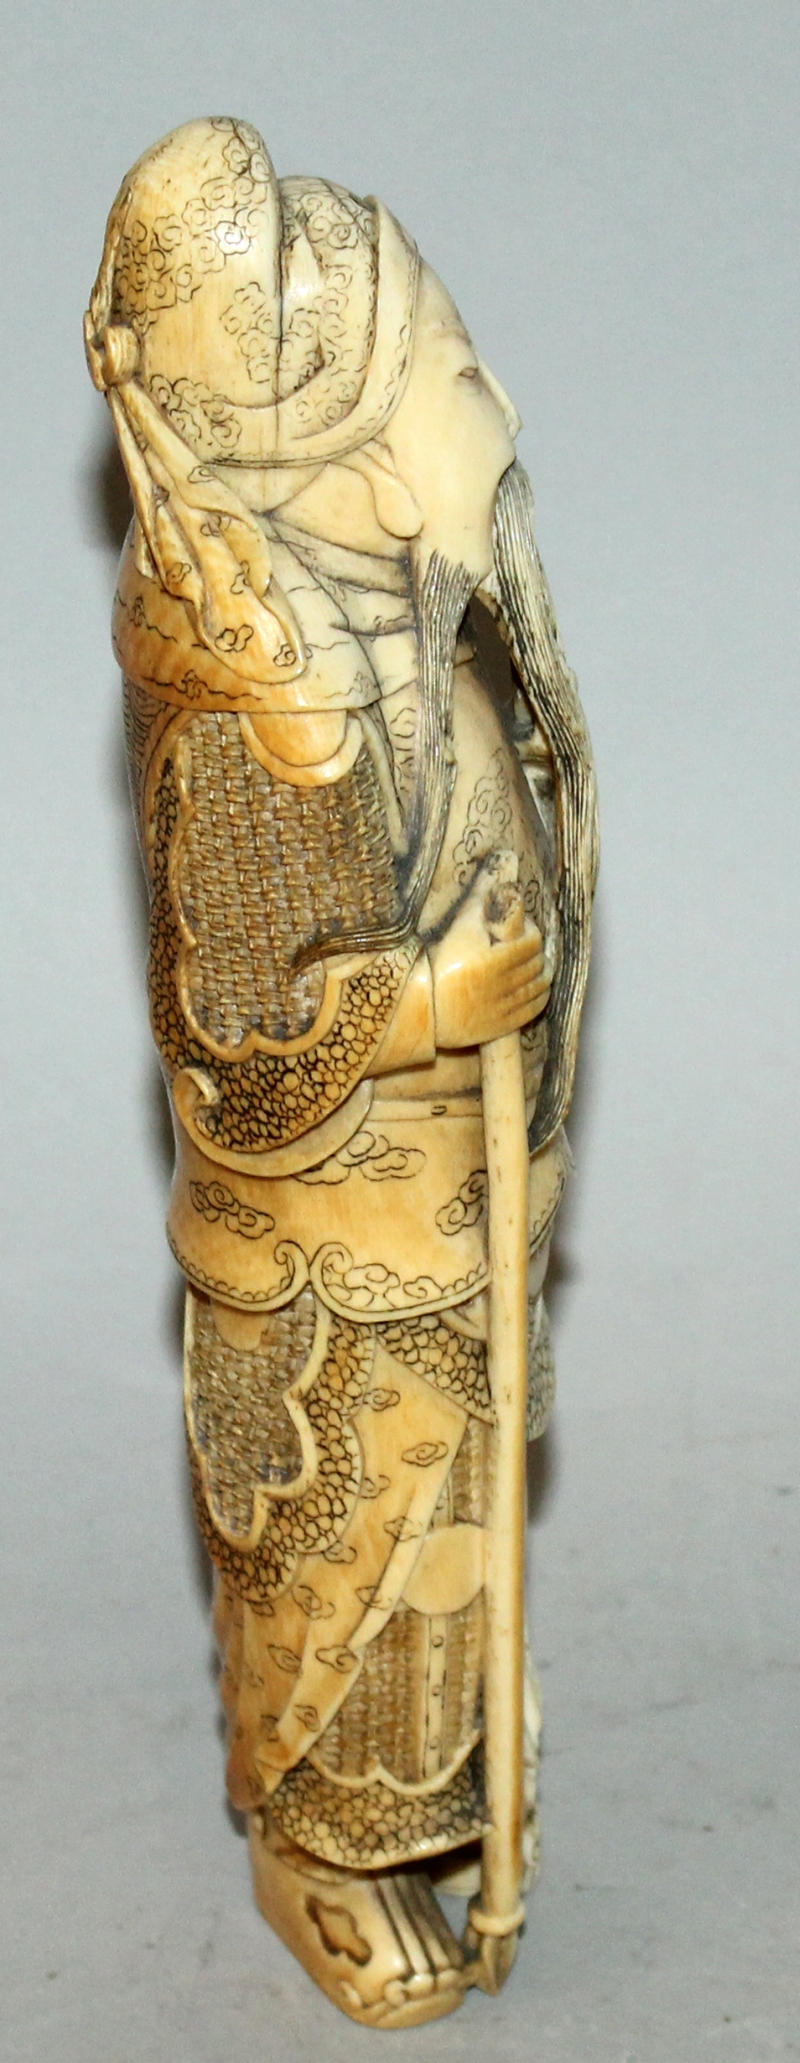 A GOOD 19TH/20TH CENTURY CHINESE CARVED IVORY FIGURE OF GUANDI, holding a long spear, his - Image 2 of 5